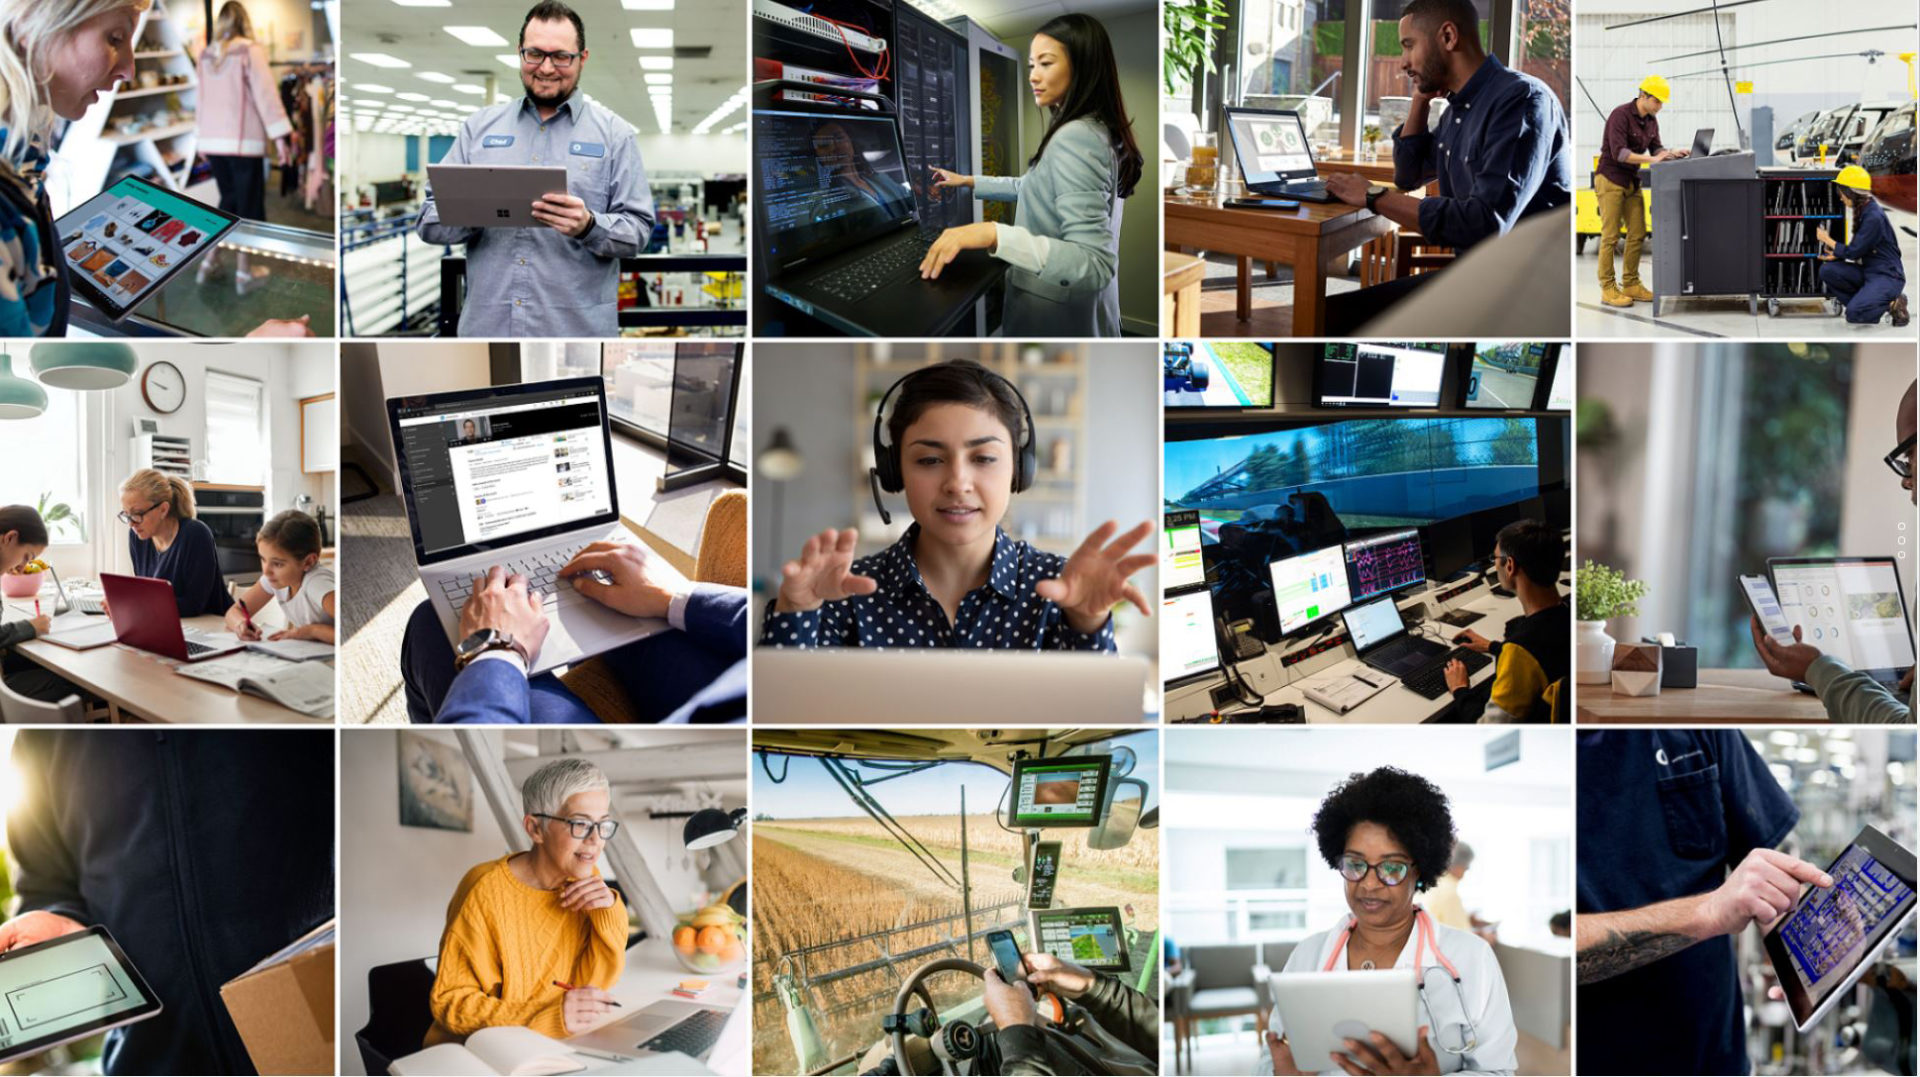 Grid of photos showing people utilizing tech skills